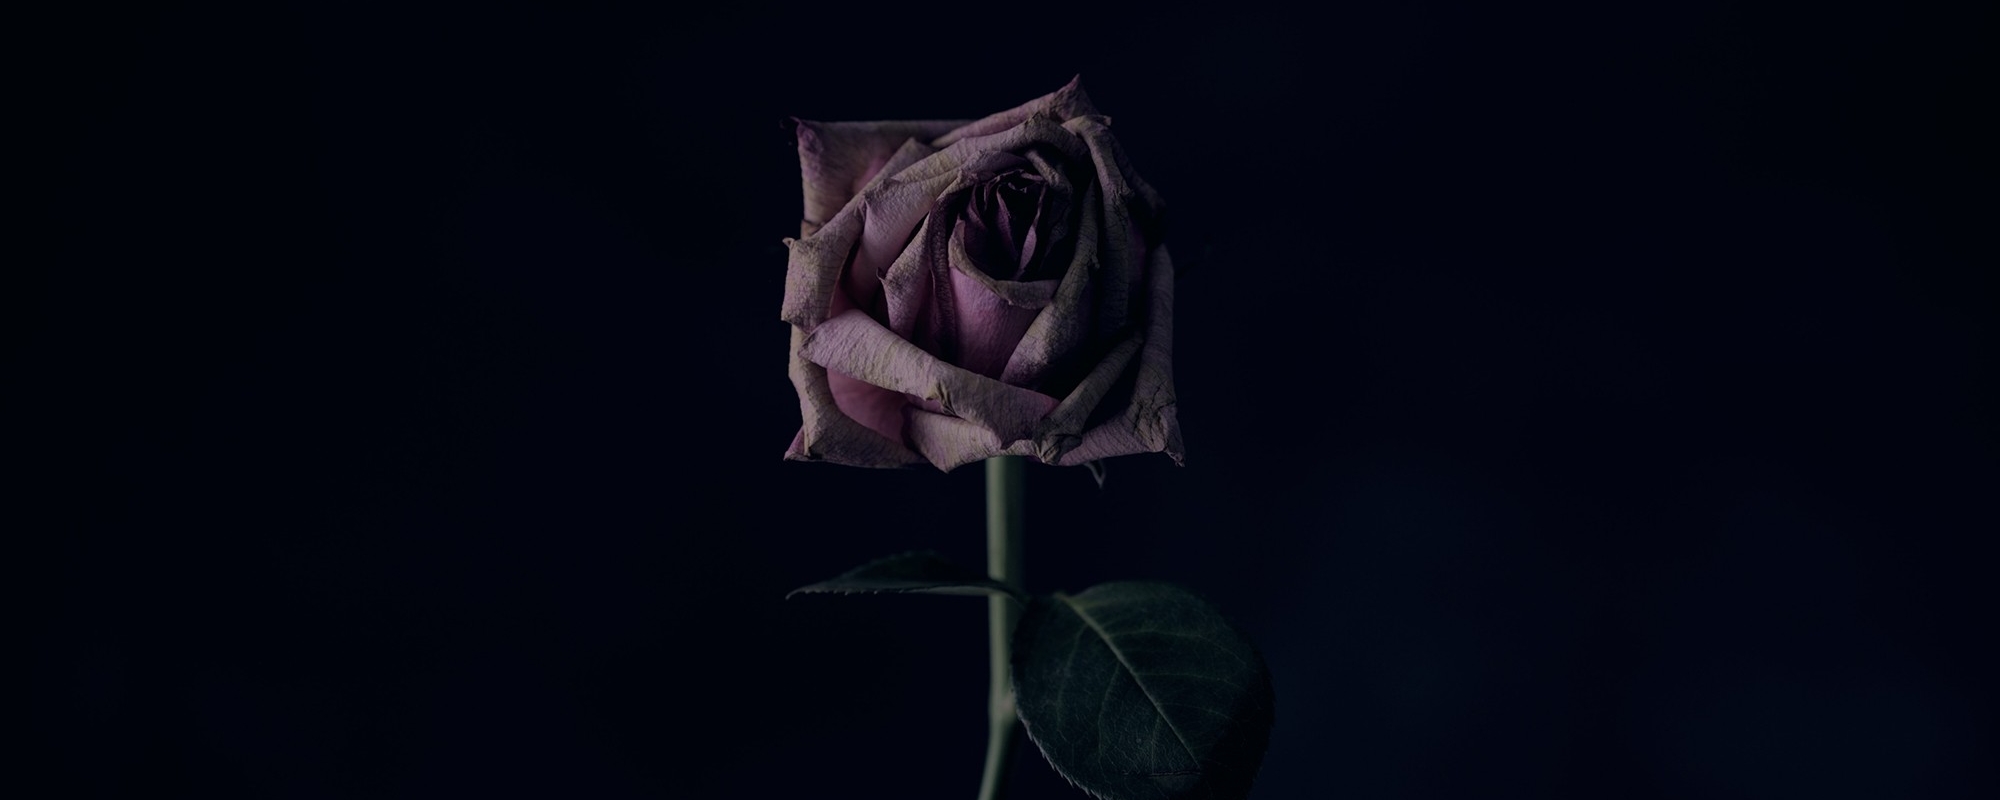 A rotting pink rose on a black background